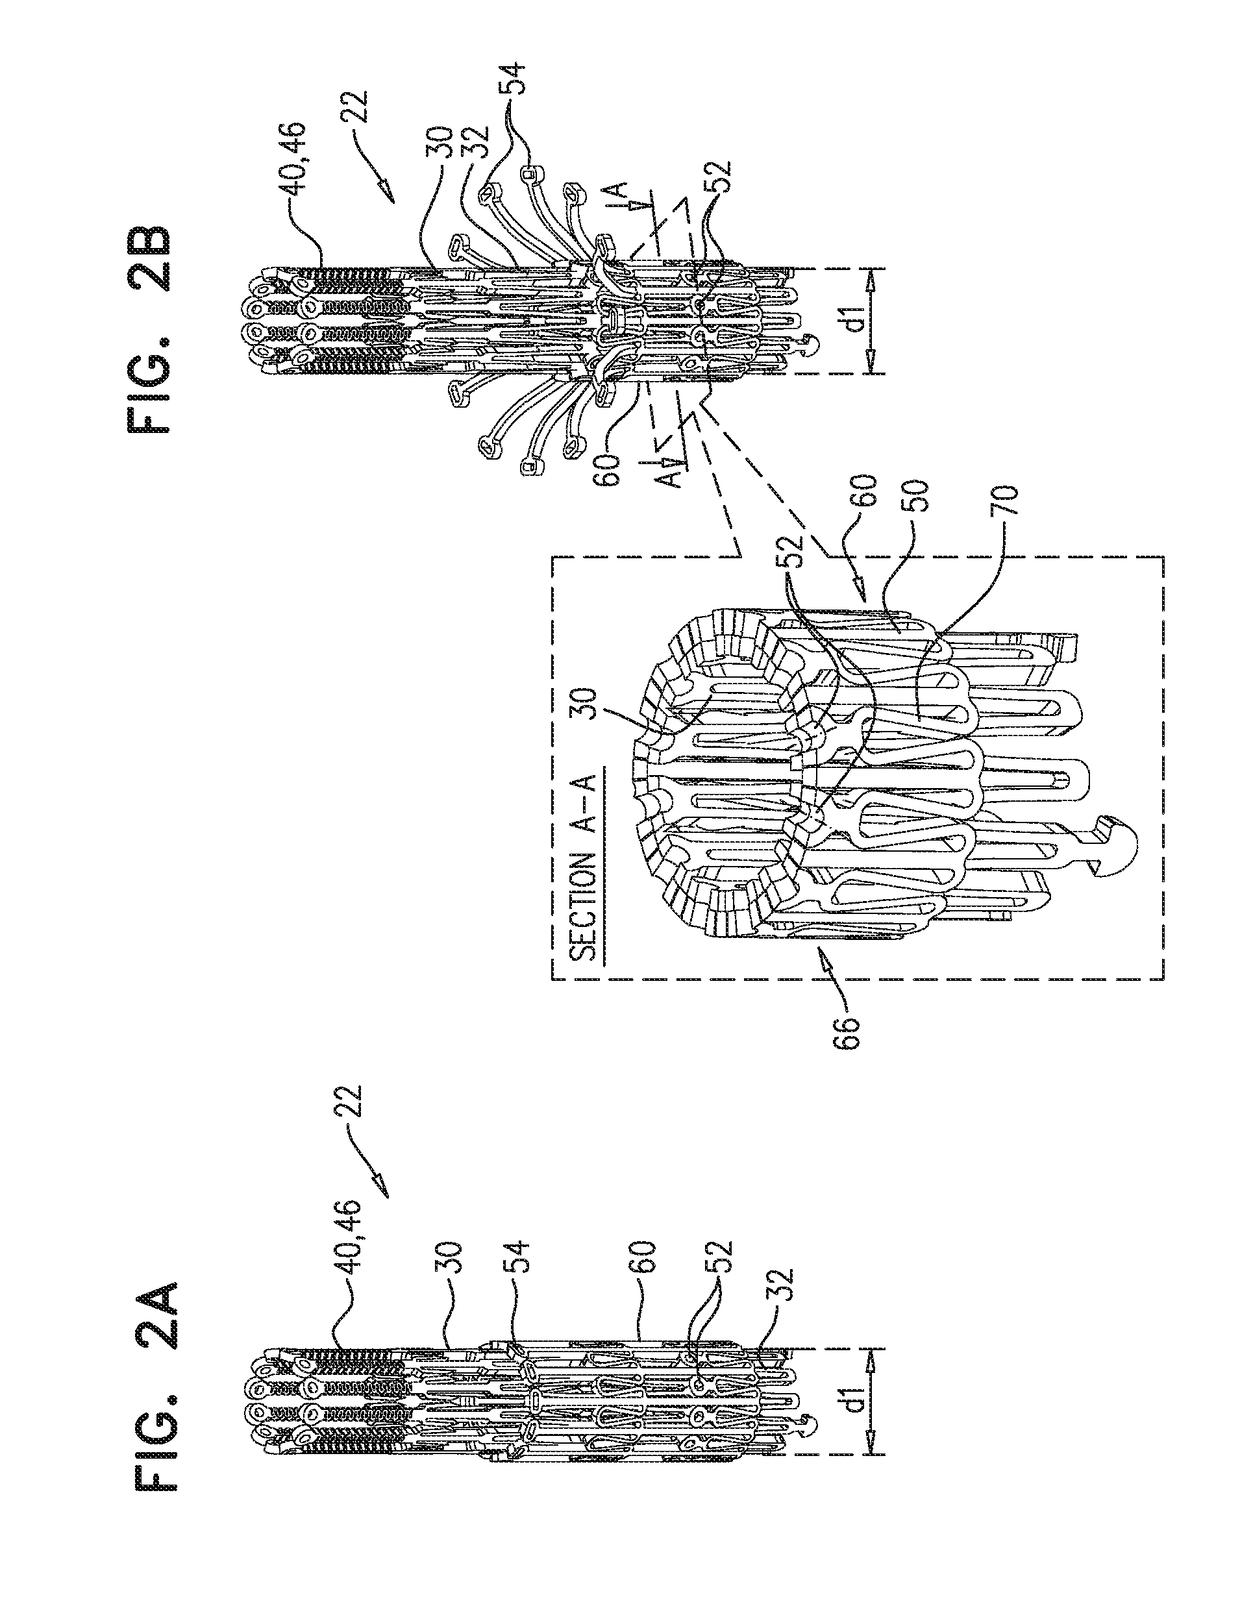 Prosthetic valve with axially-sliding frames